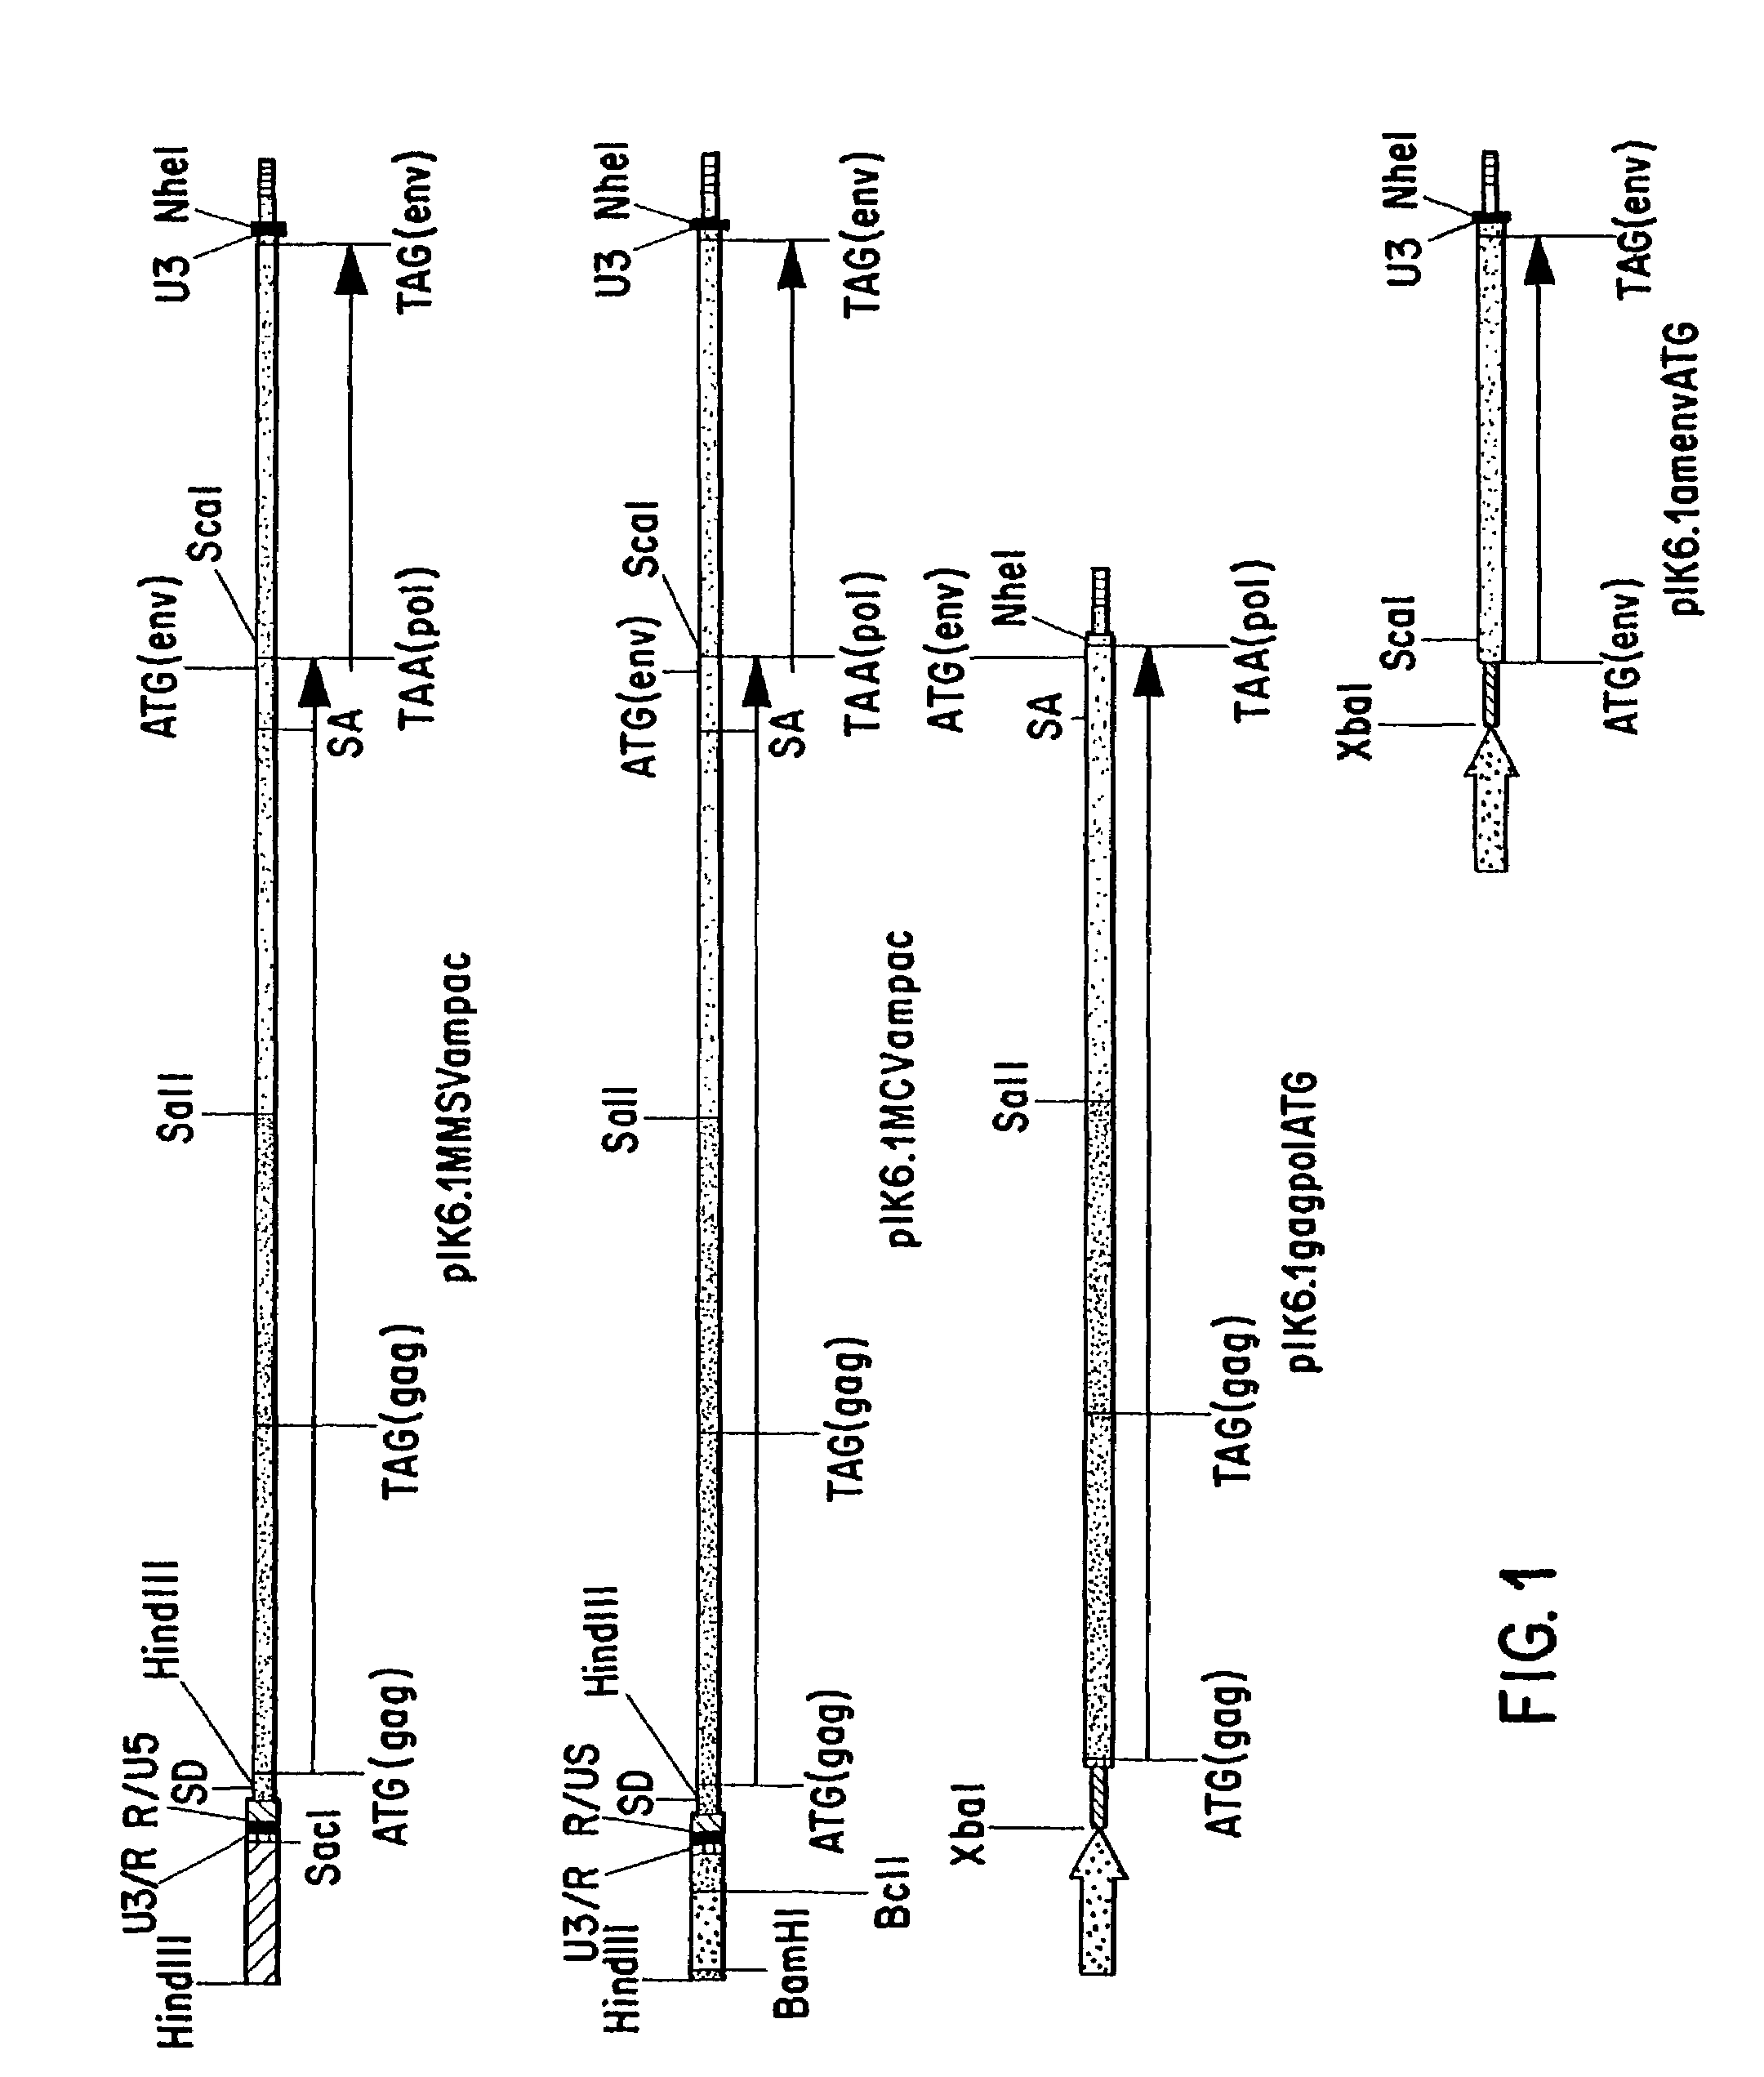 Method for production of high titer virus and high efficiency retroviral mediated transduction of mammalian cells